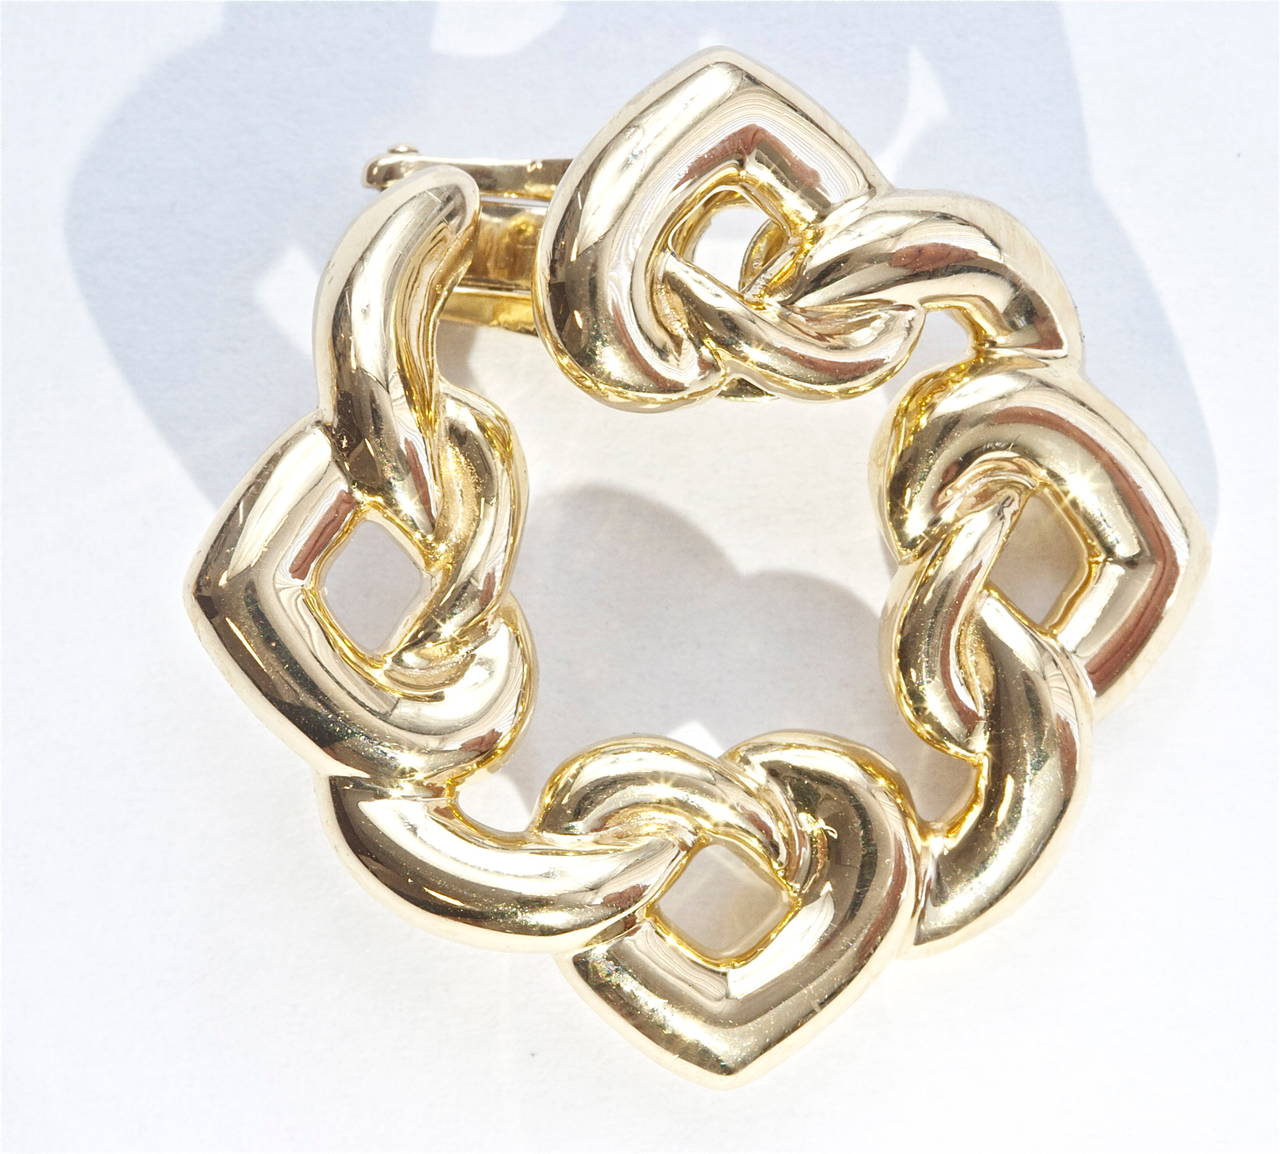 18K Gold interlocking heart earrings by Bvlgari.  Good for any occasion.

Signed Bvlgari and numbered.